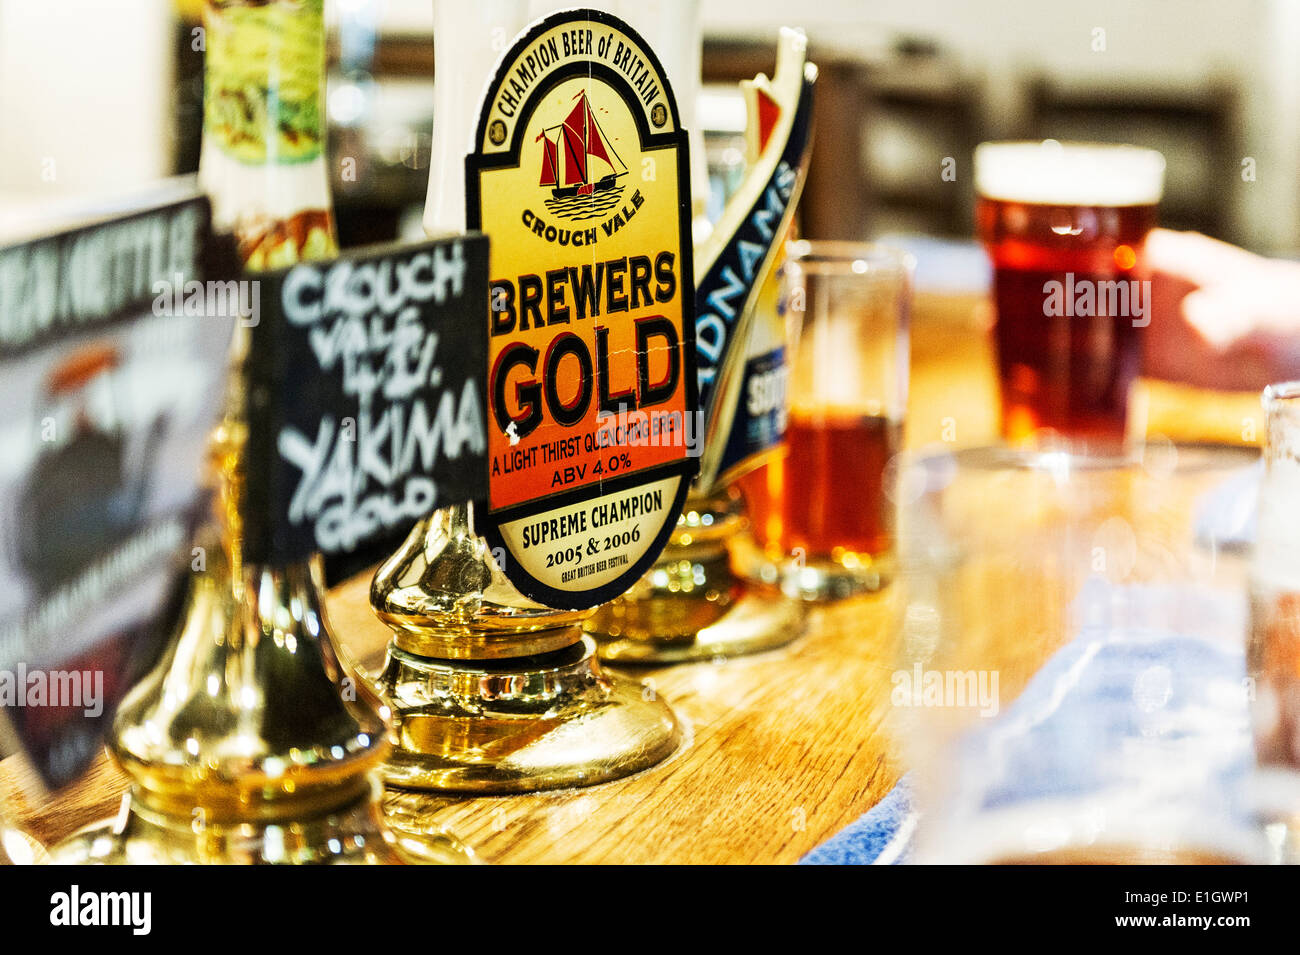 Real Ale beer pump handles on a bar. Stock Photo